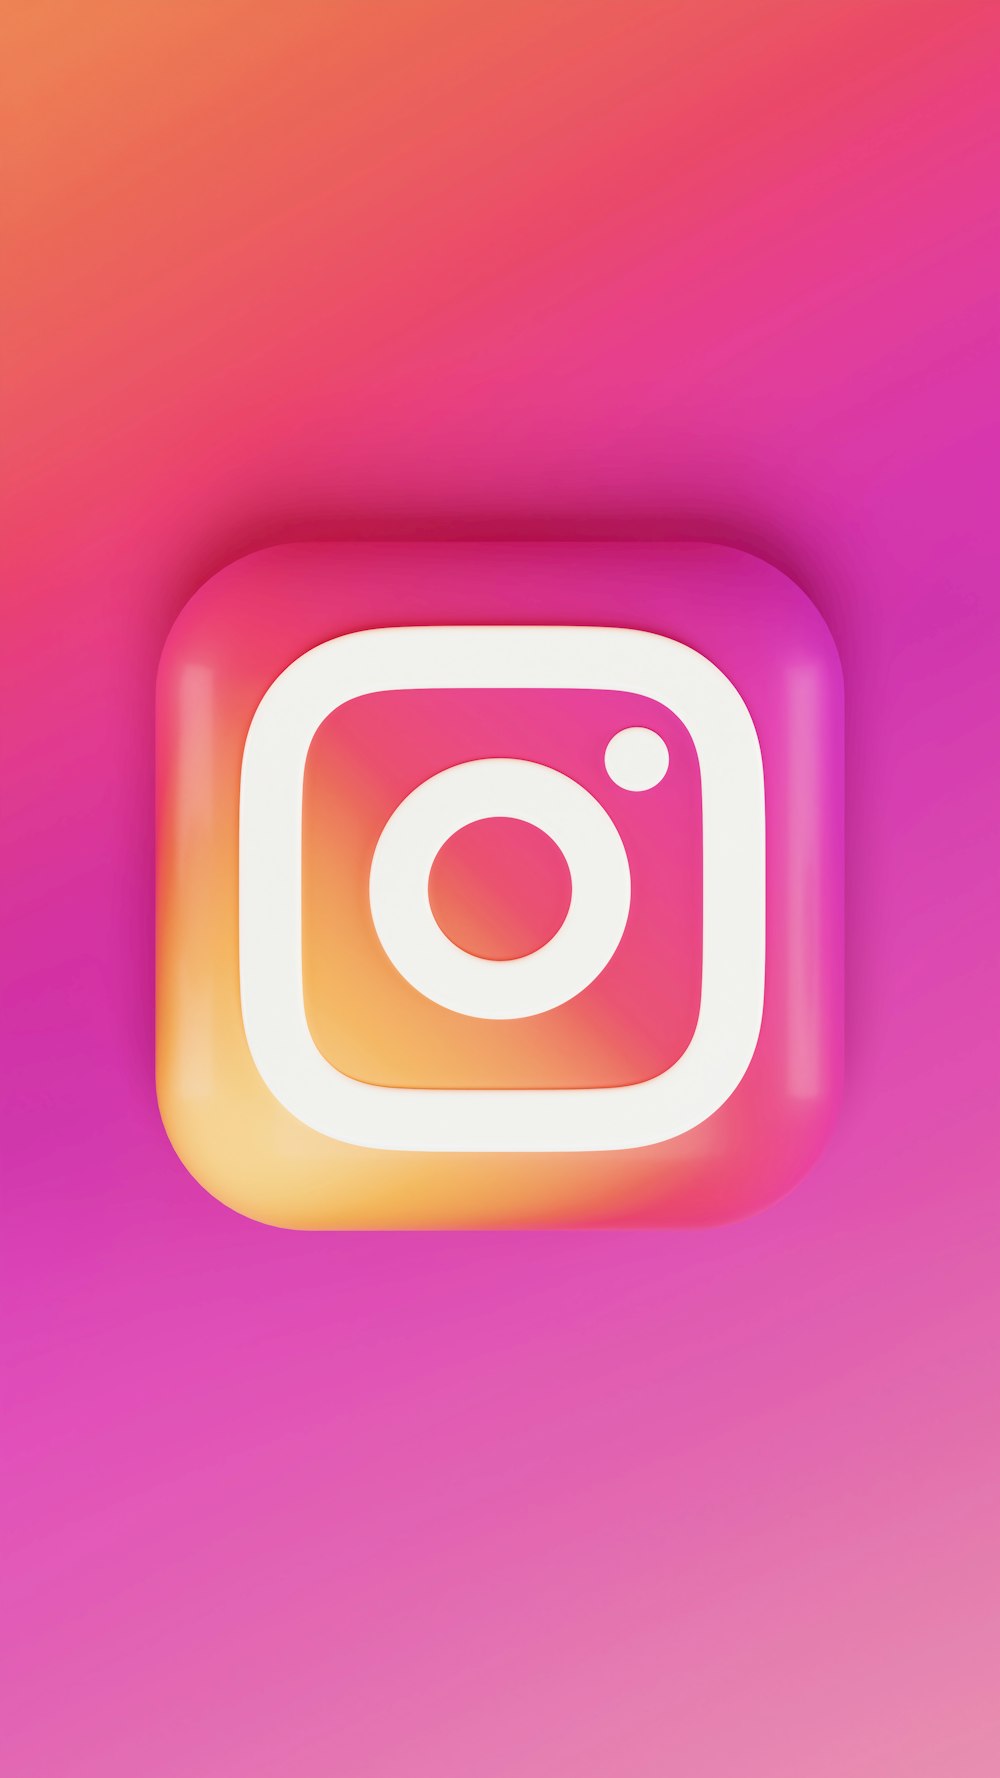 Best instagram profile pictures for boys